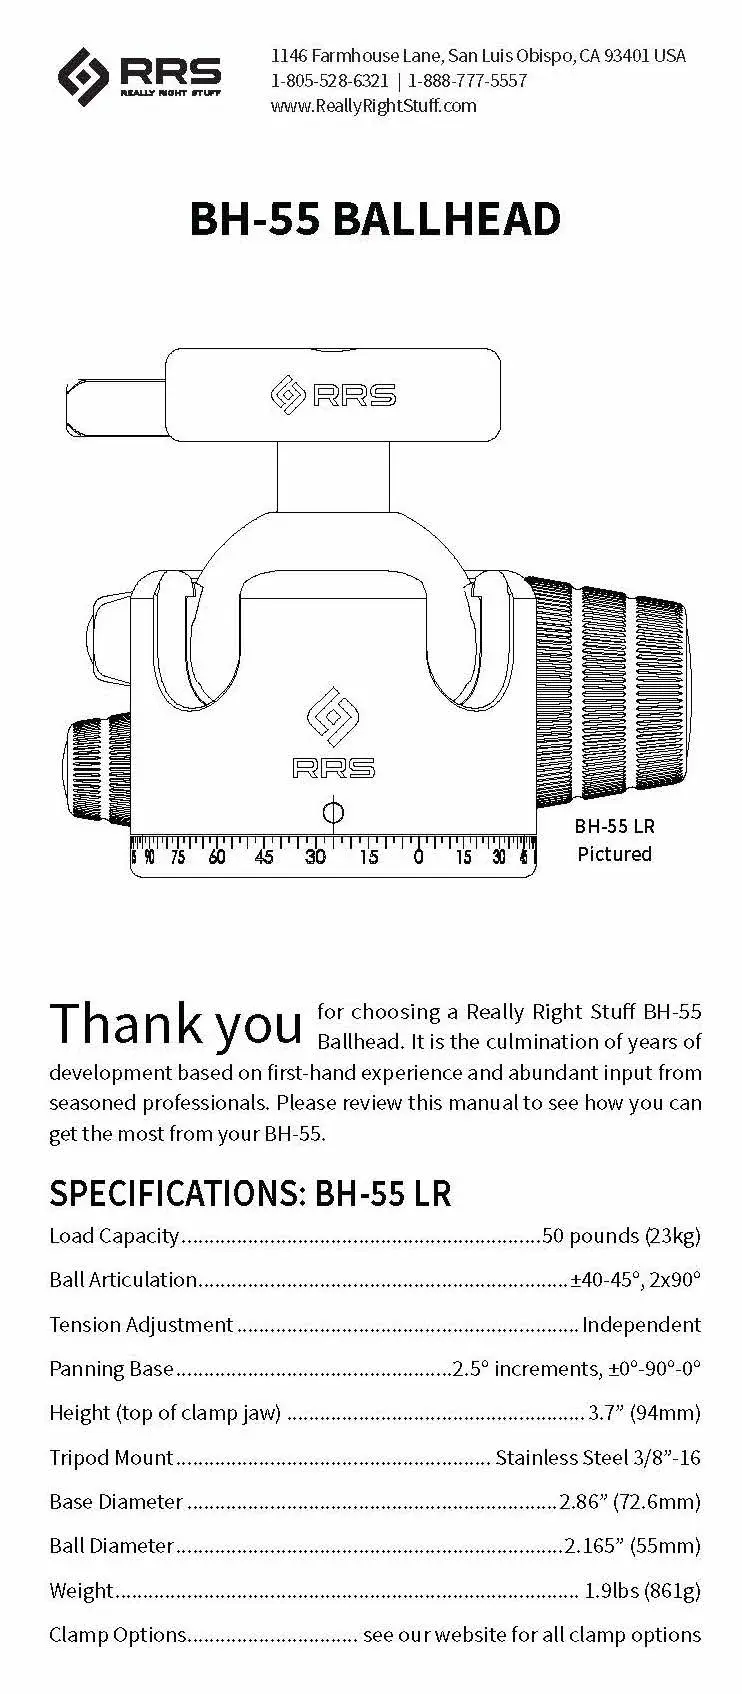 specifications of the BH-55 ball head